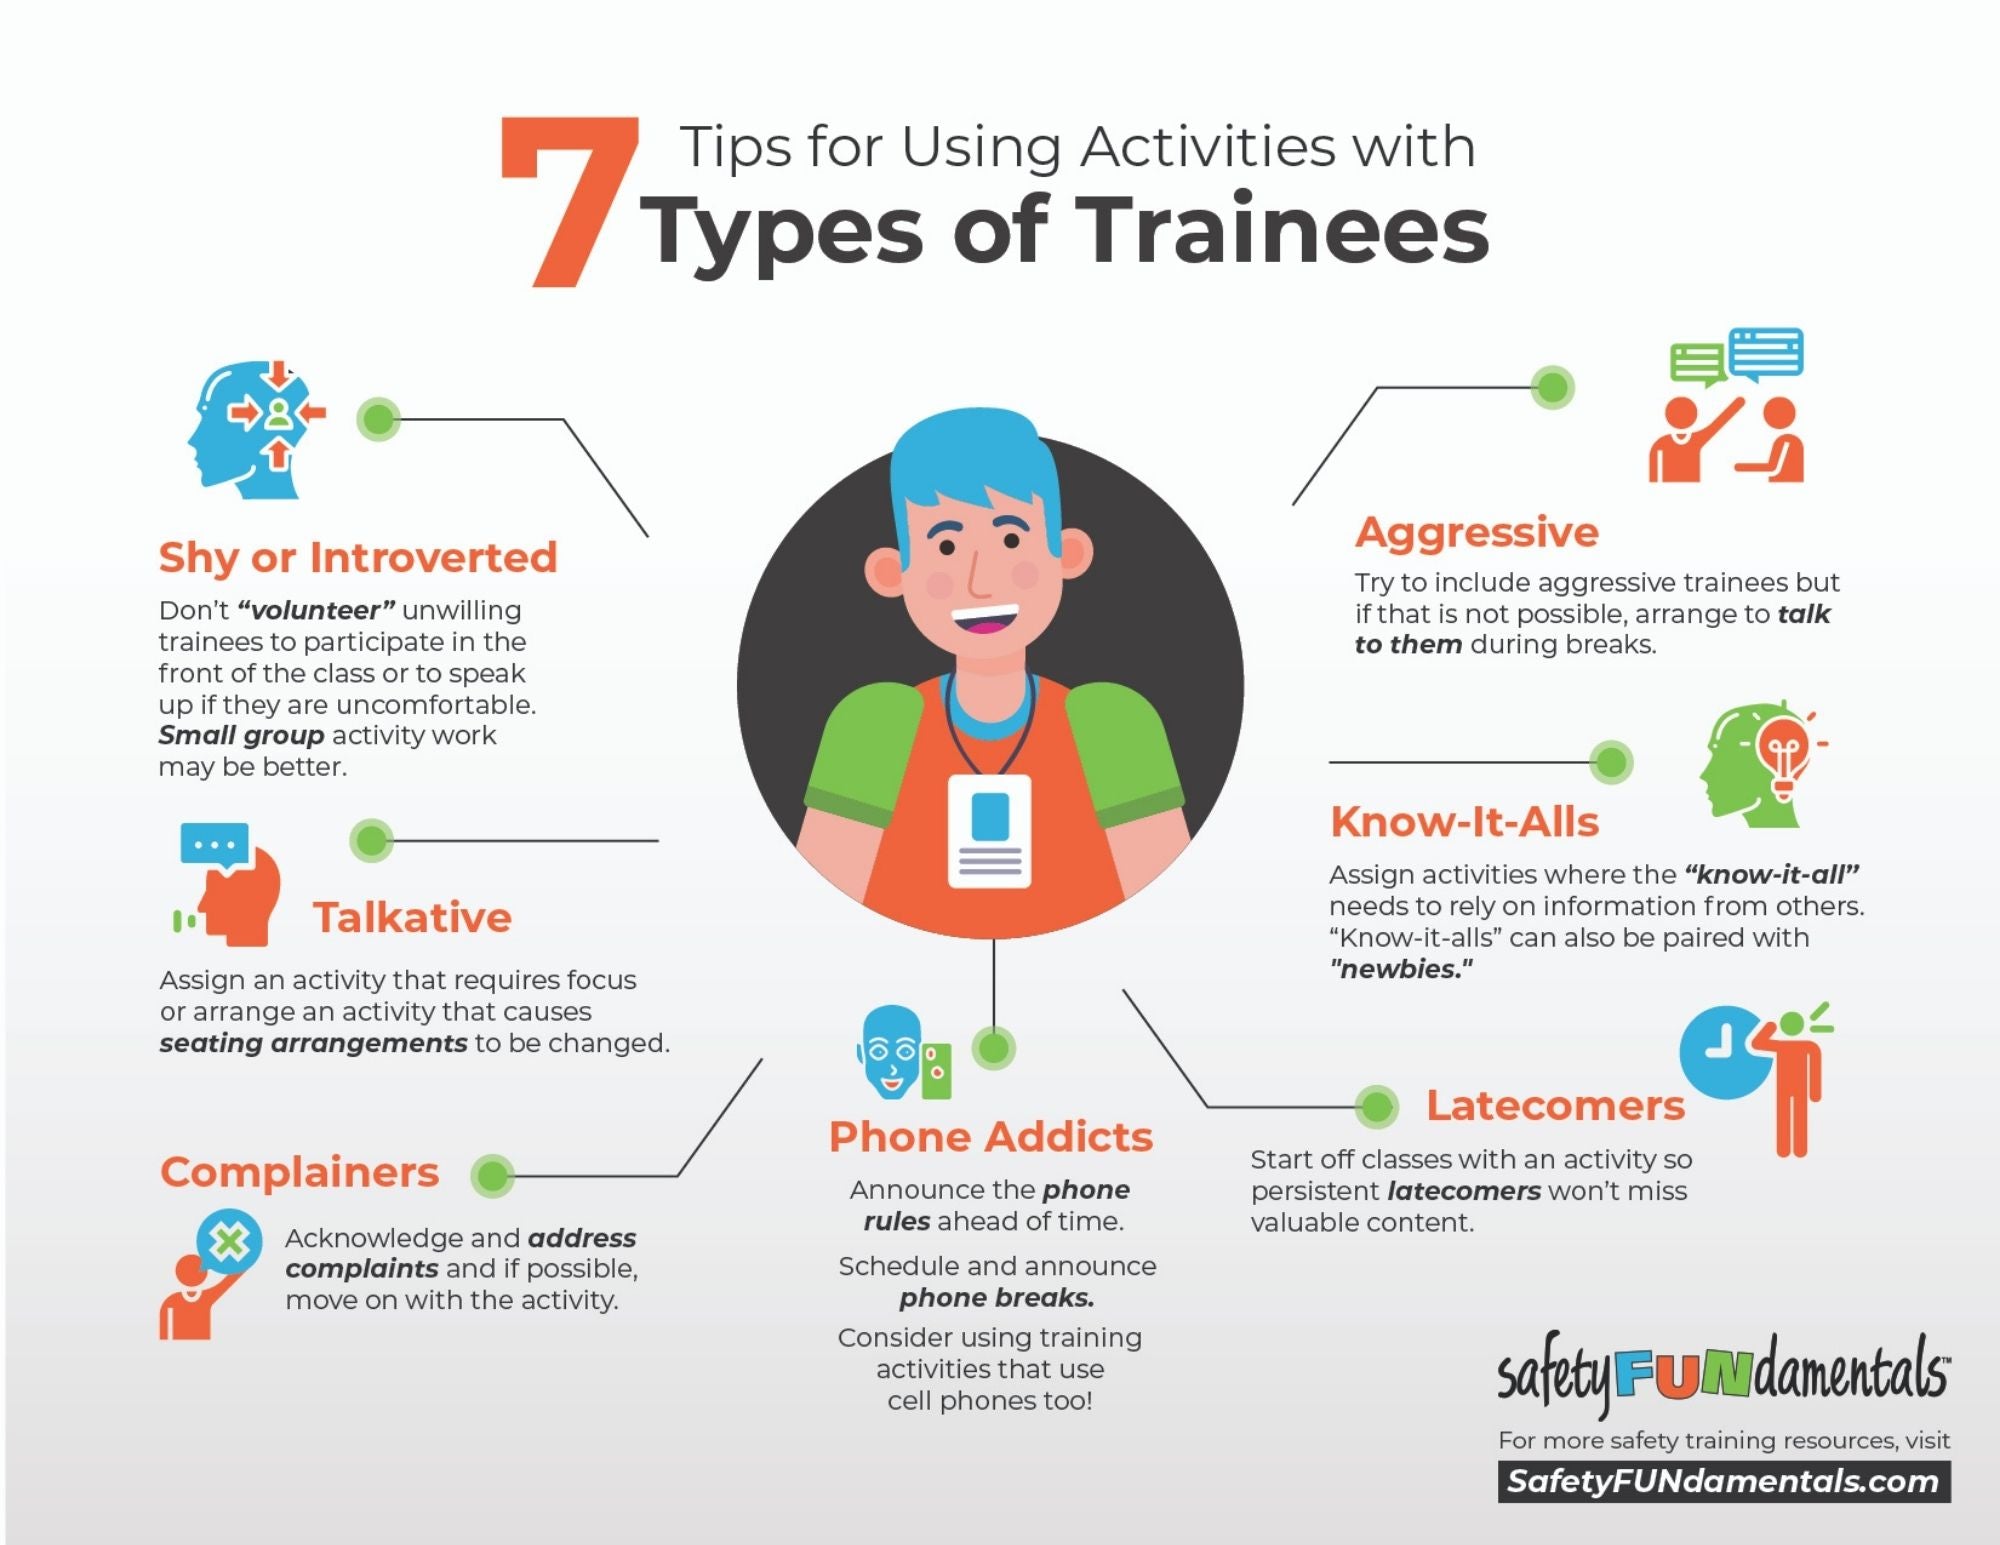 7 Tips for Training 7 Types of Trainees Infographic (English and Spanish)